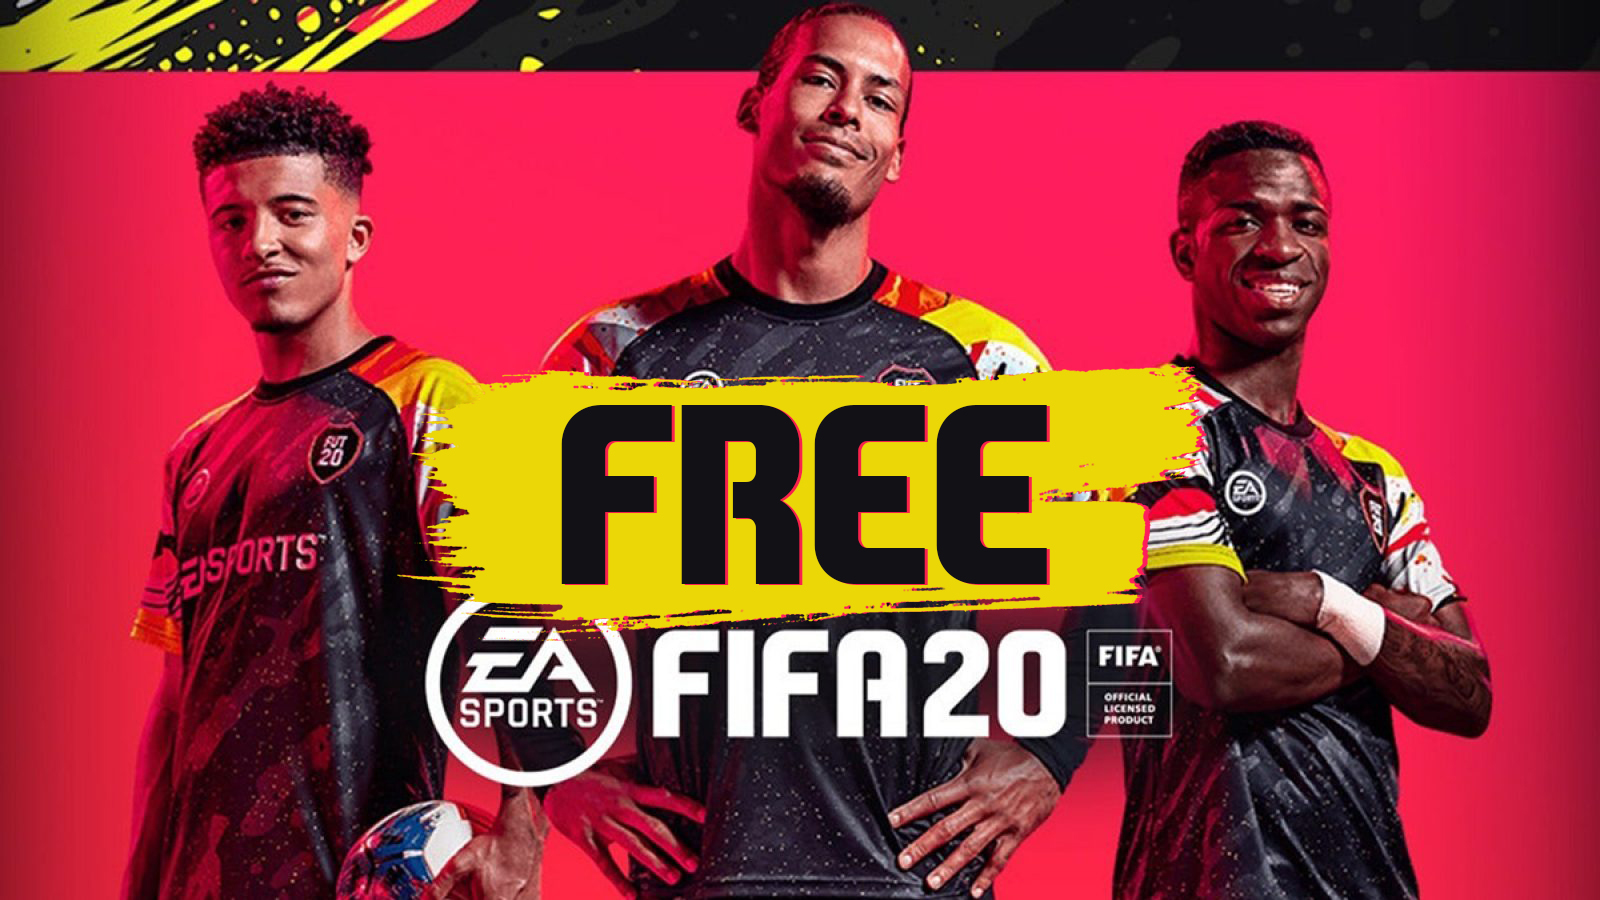 Fifa 20 Demo Now Available To Download For Free Fifa 20 Fifamoro